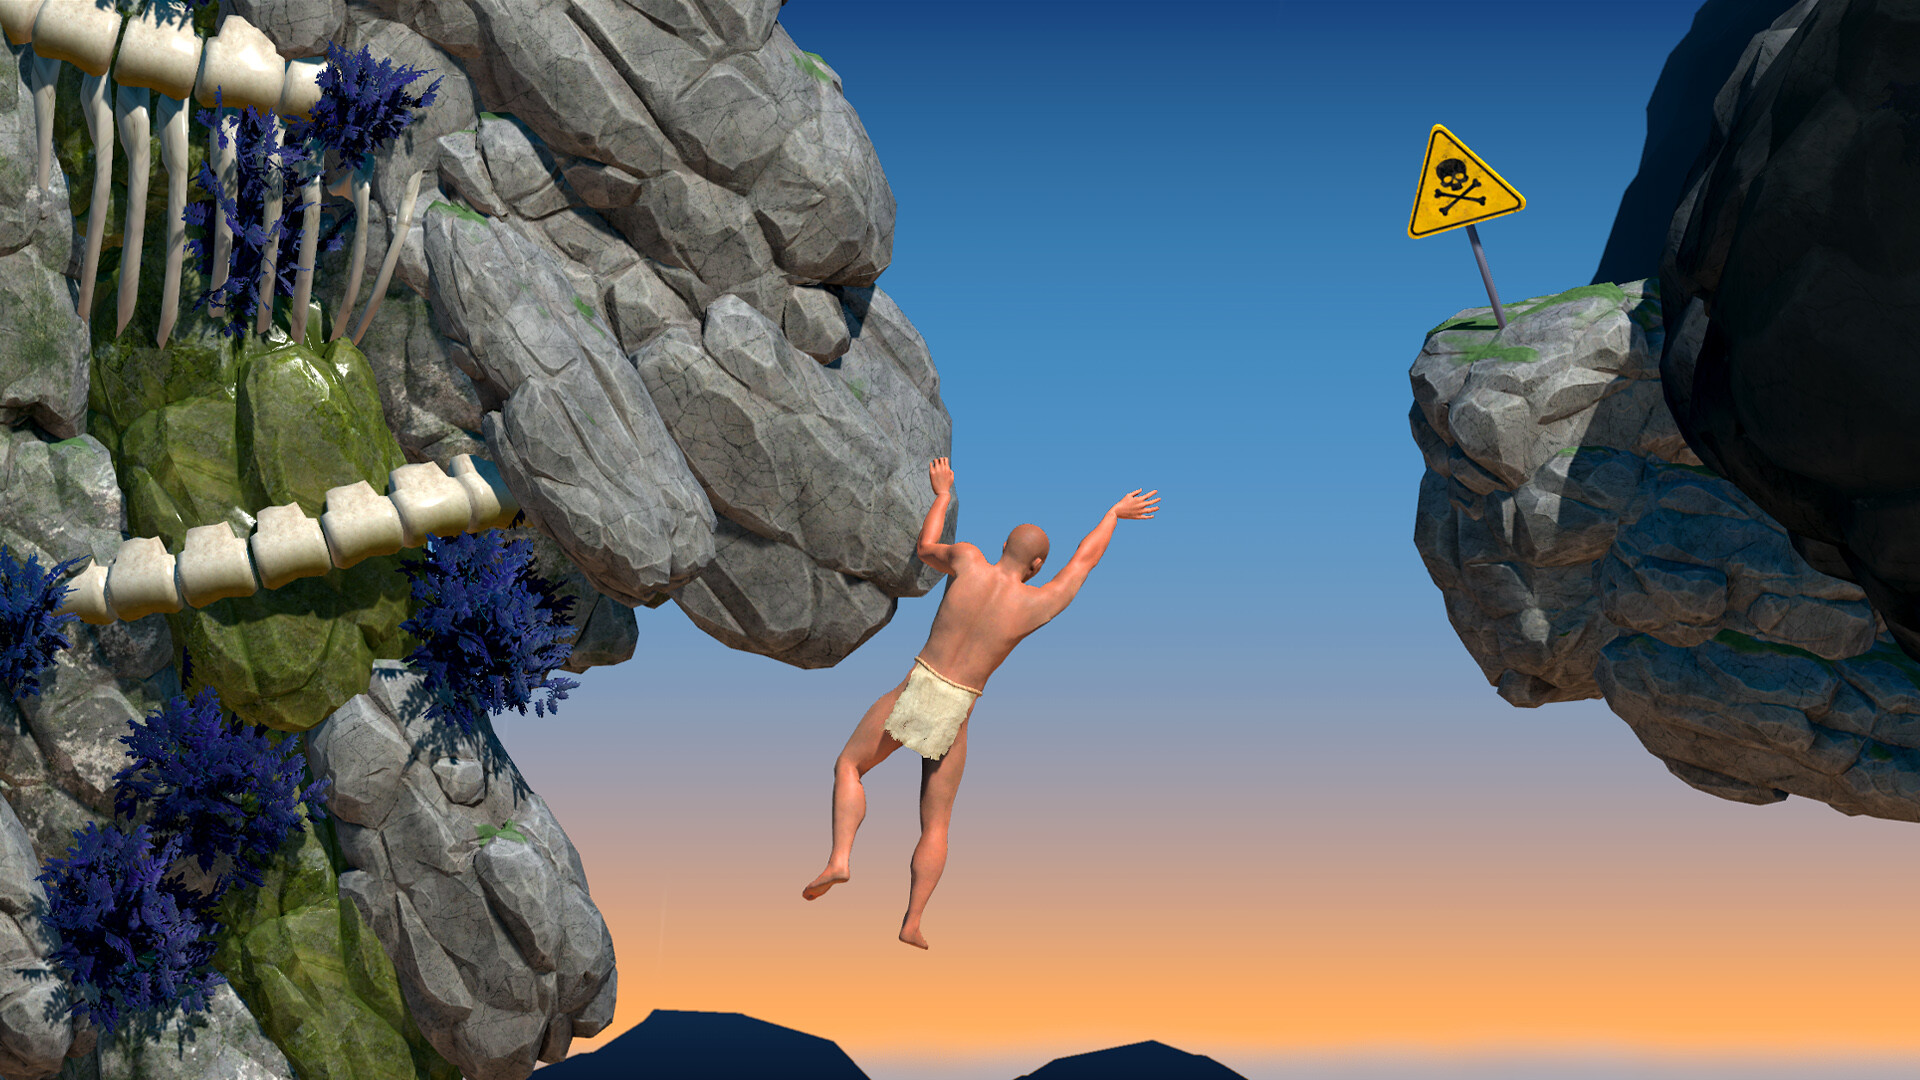 A Difficult Game About Climbing on Steam